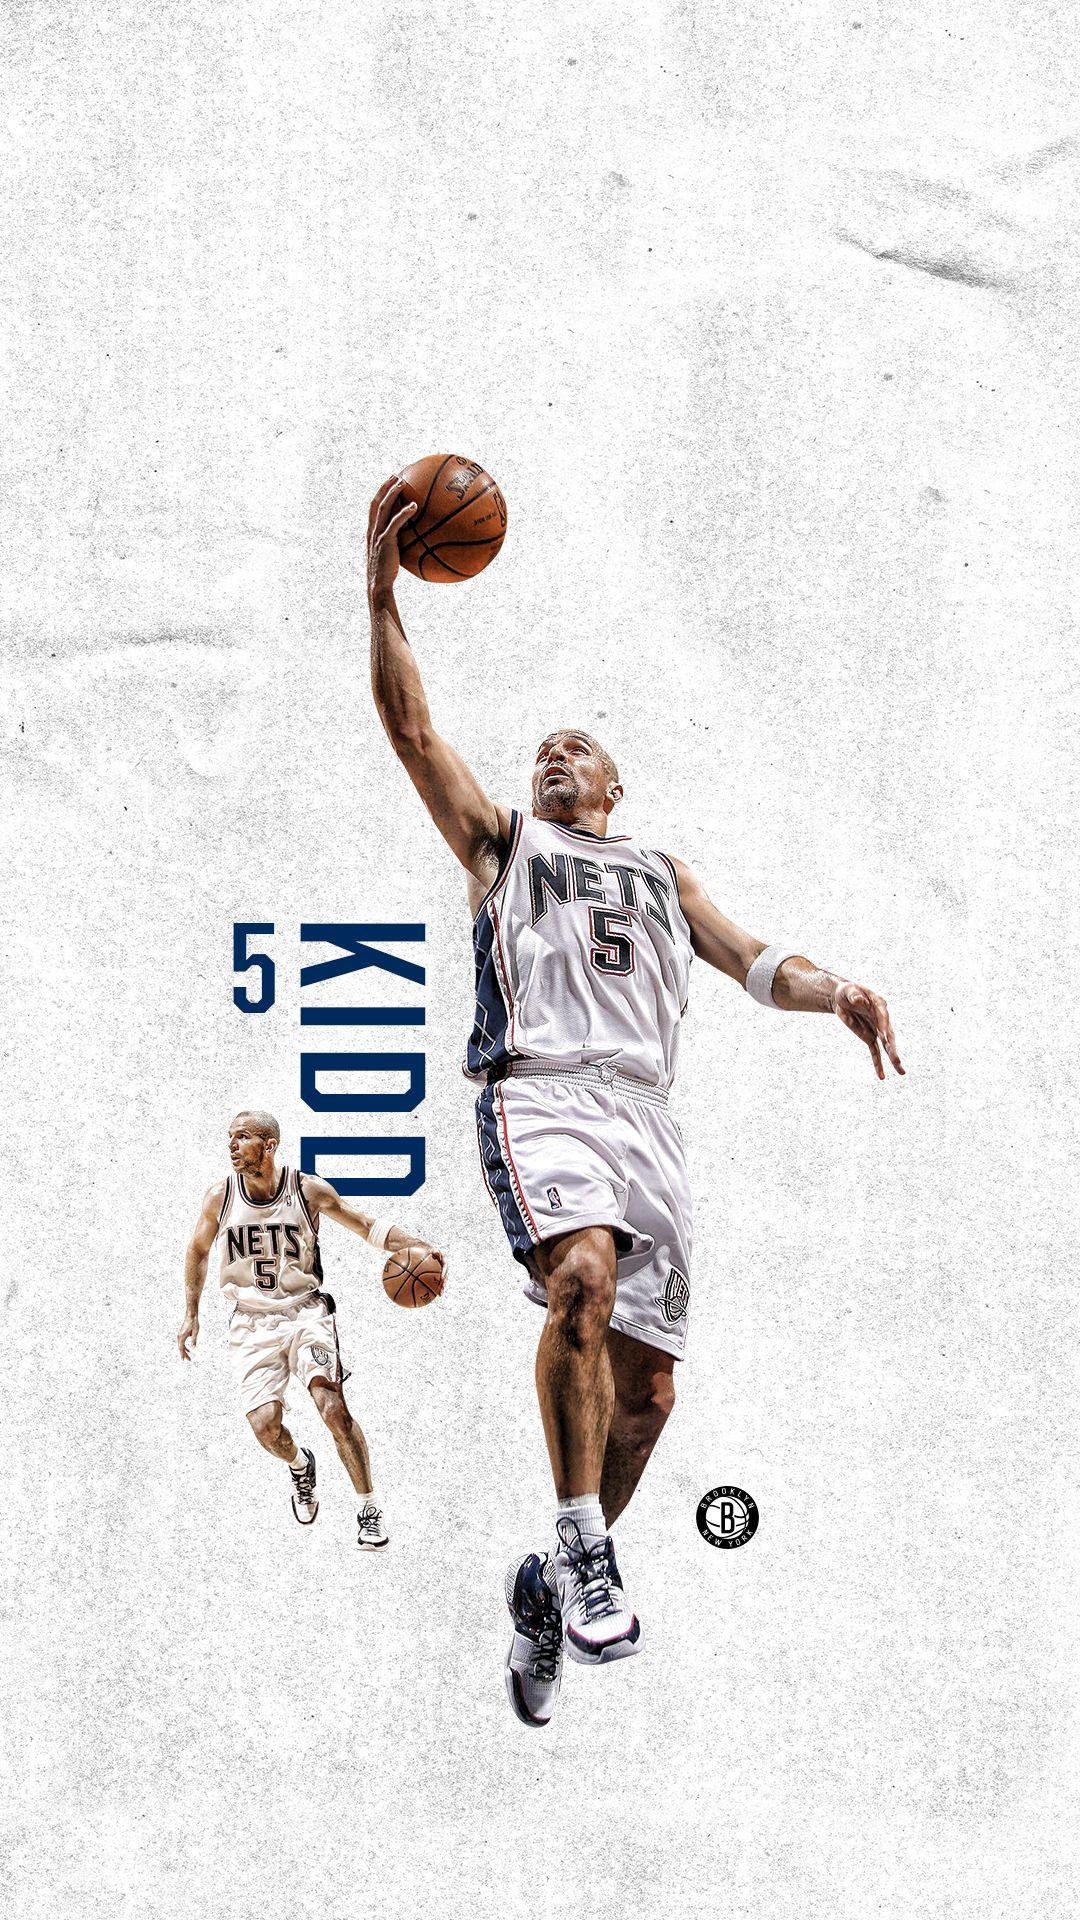 Wallpaper Wednesday: Jason Kidd in the HoF edition! with a special